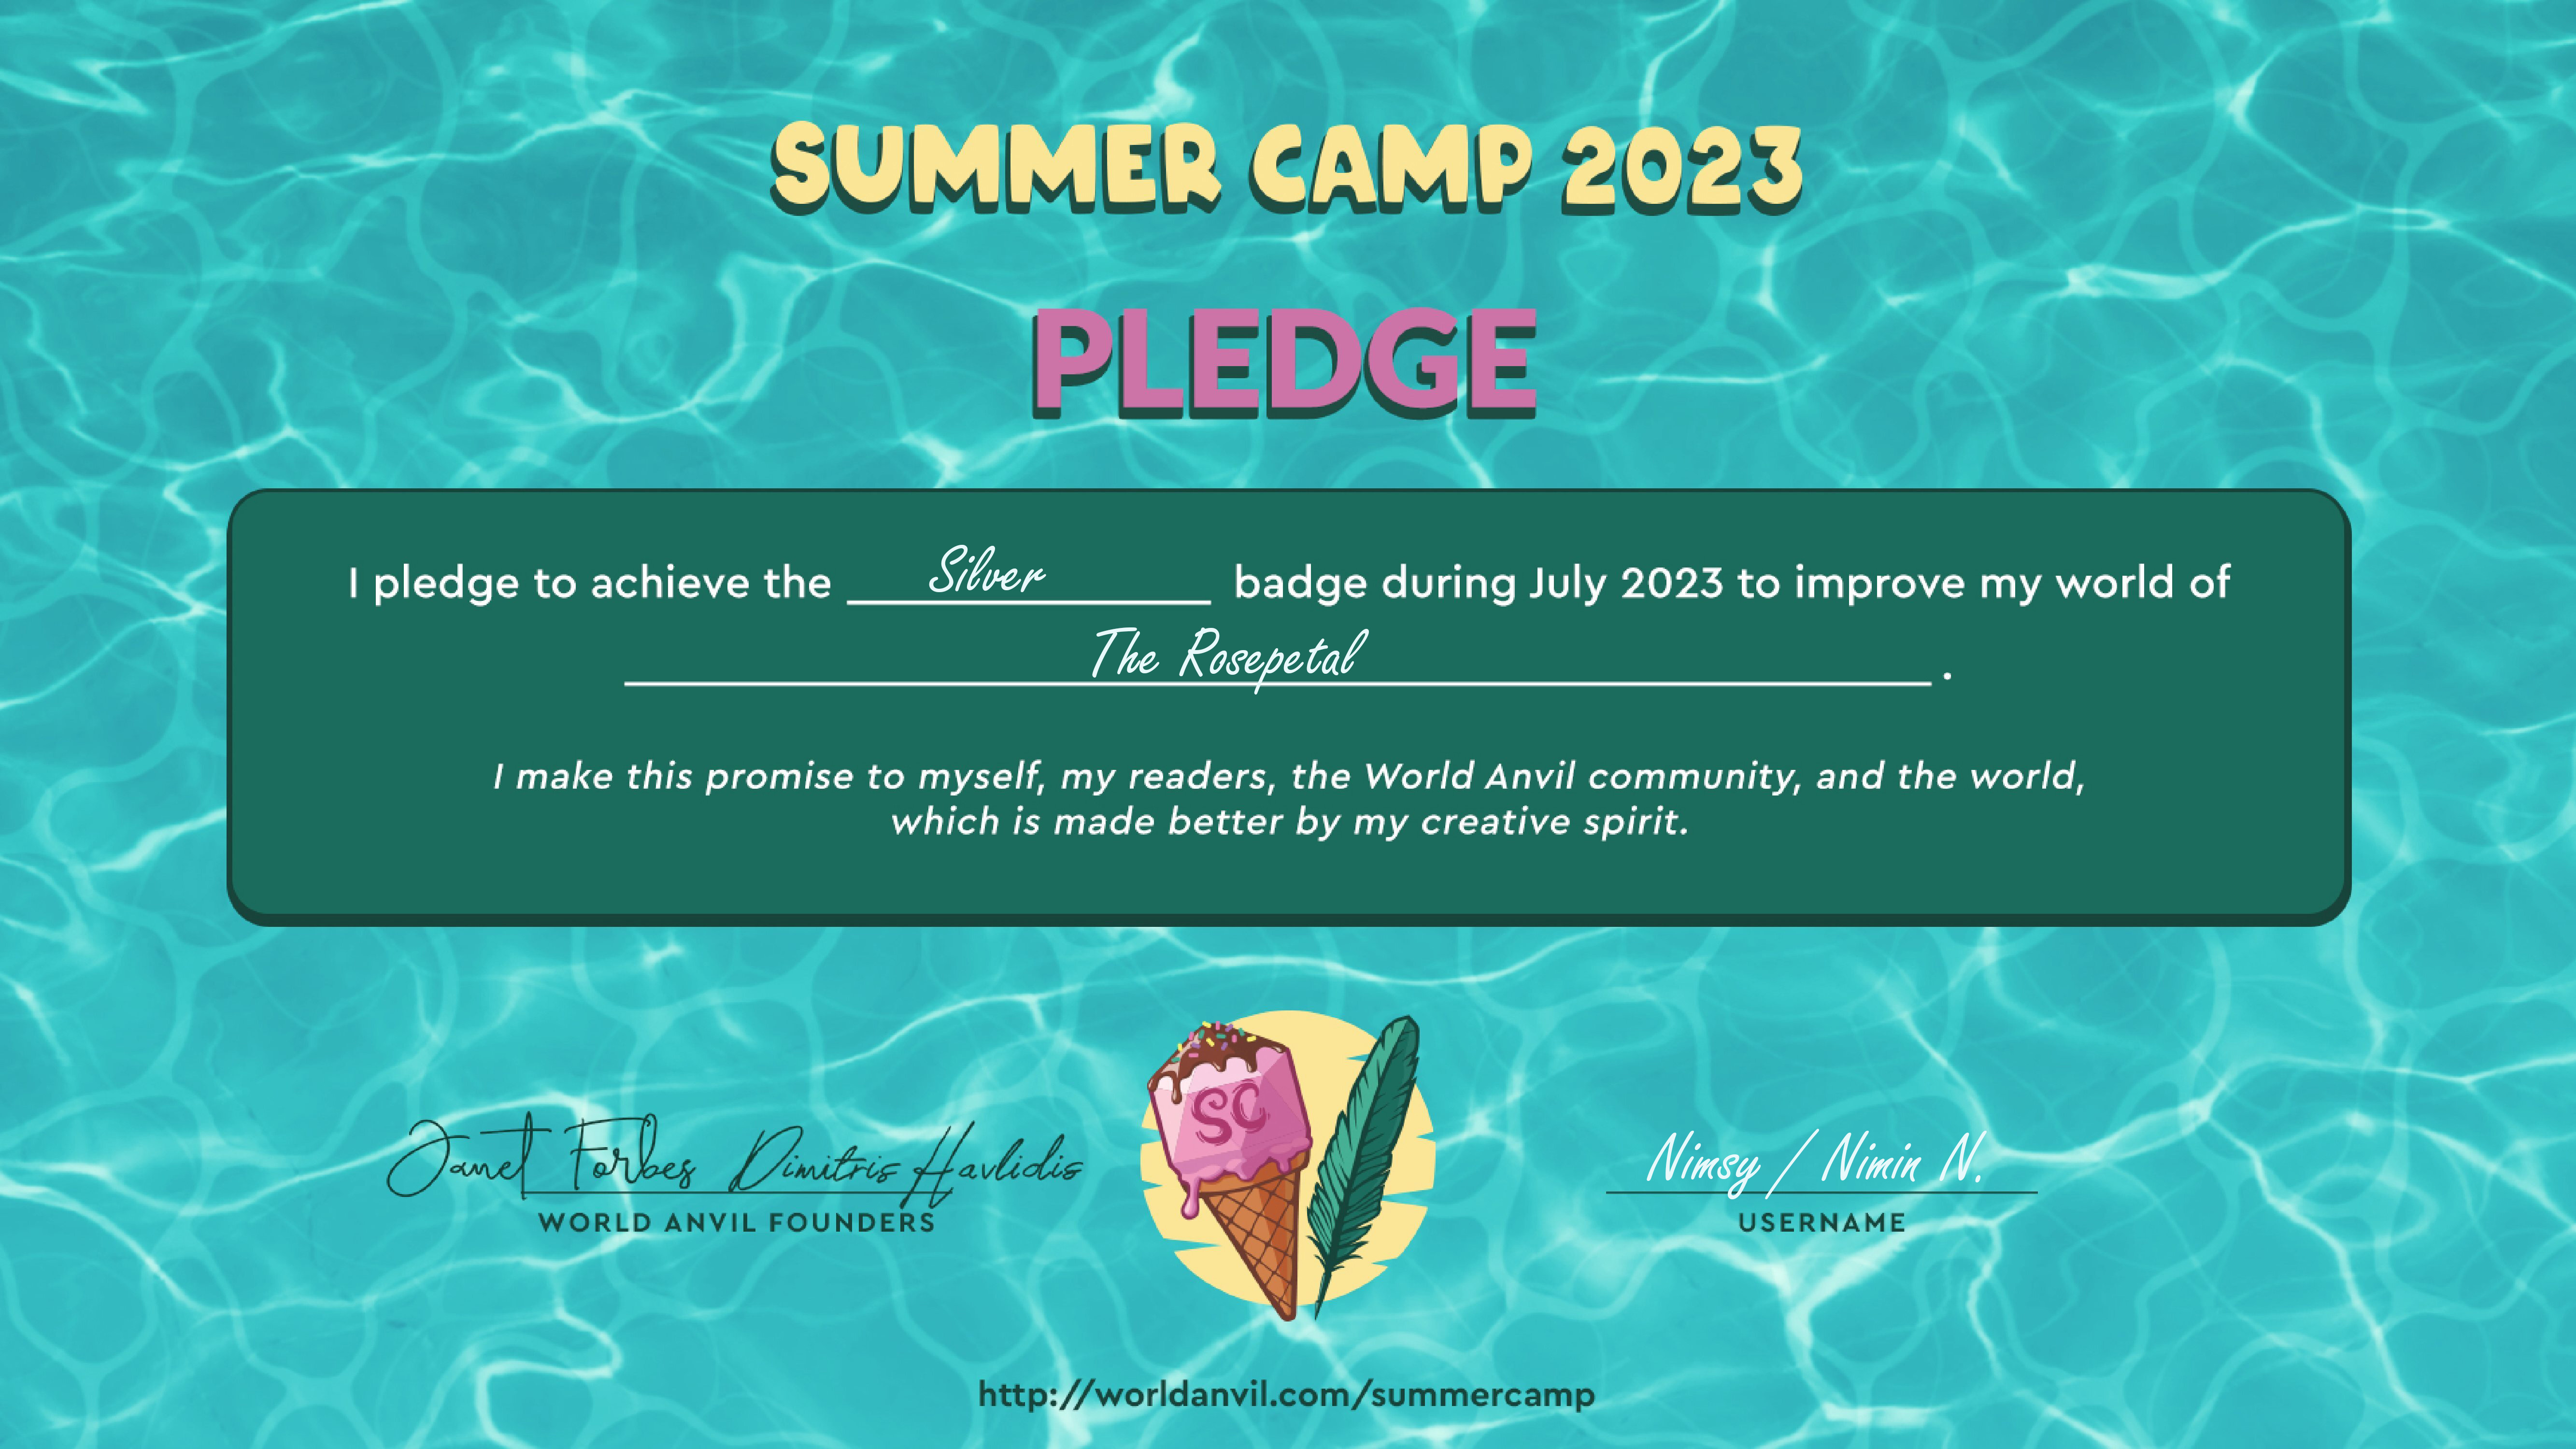 A pledge for my goals in Summer Camp 2023: reaching the silver badge.